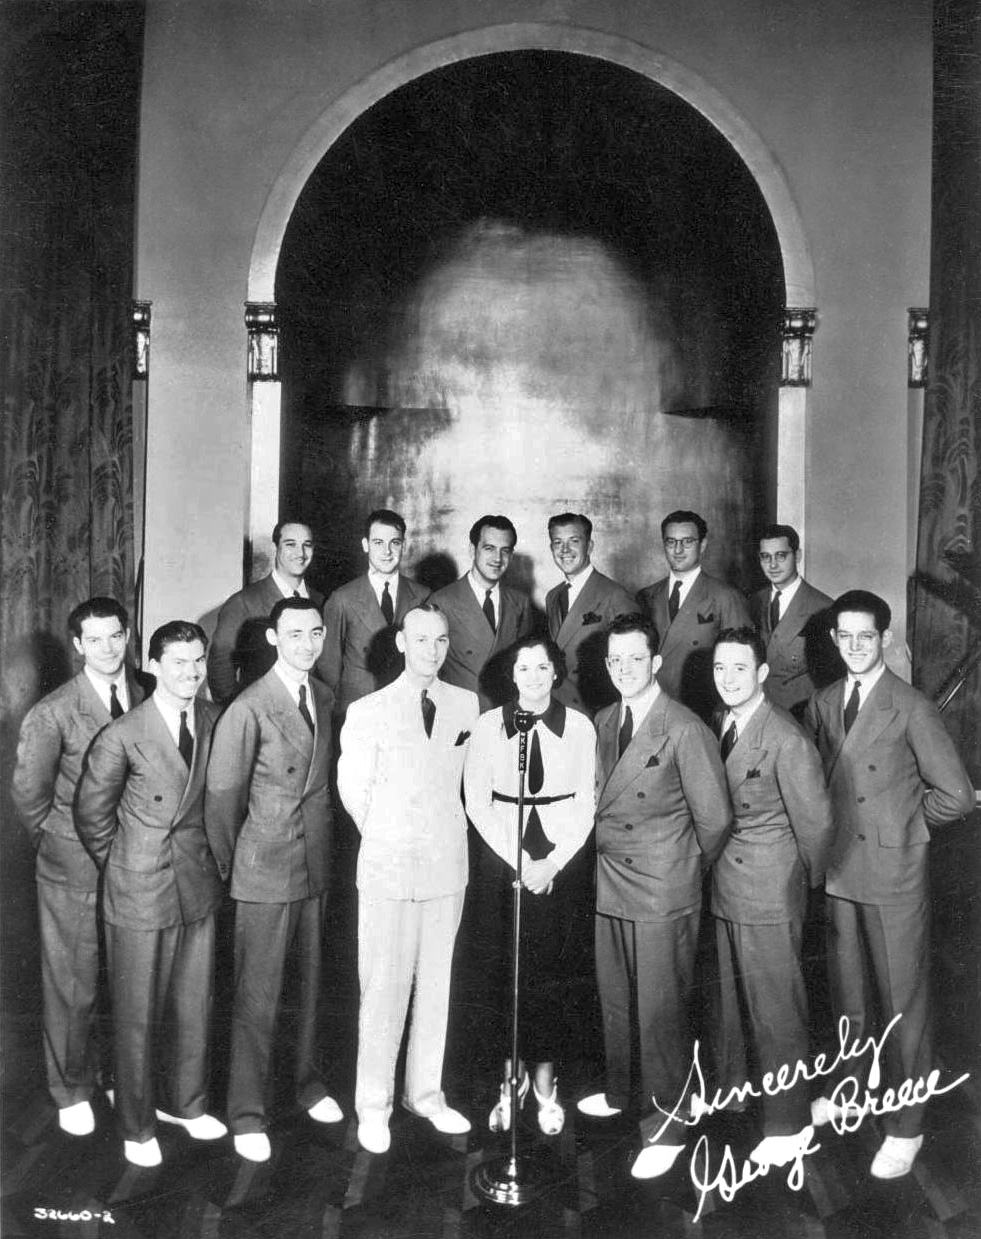 The George Breece Orchestra, sometime in the 1930s in Sacramento, California.  My wife's father, Bodie Aubery, is second from the right on the bottom row. At one point, George Breece was the music director of radio station KFBK, still on the air. View full size.